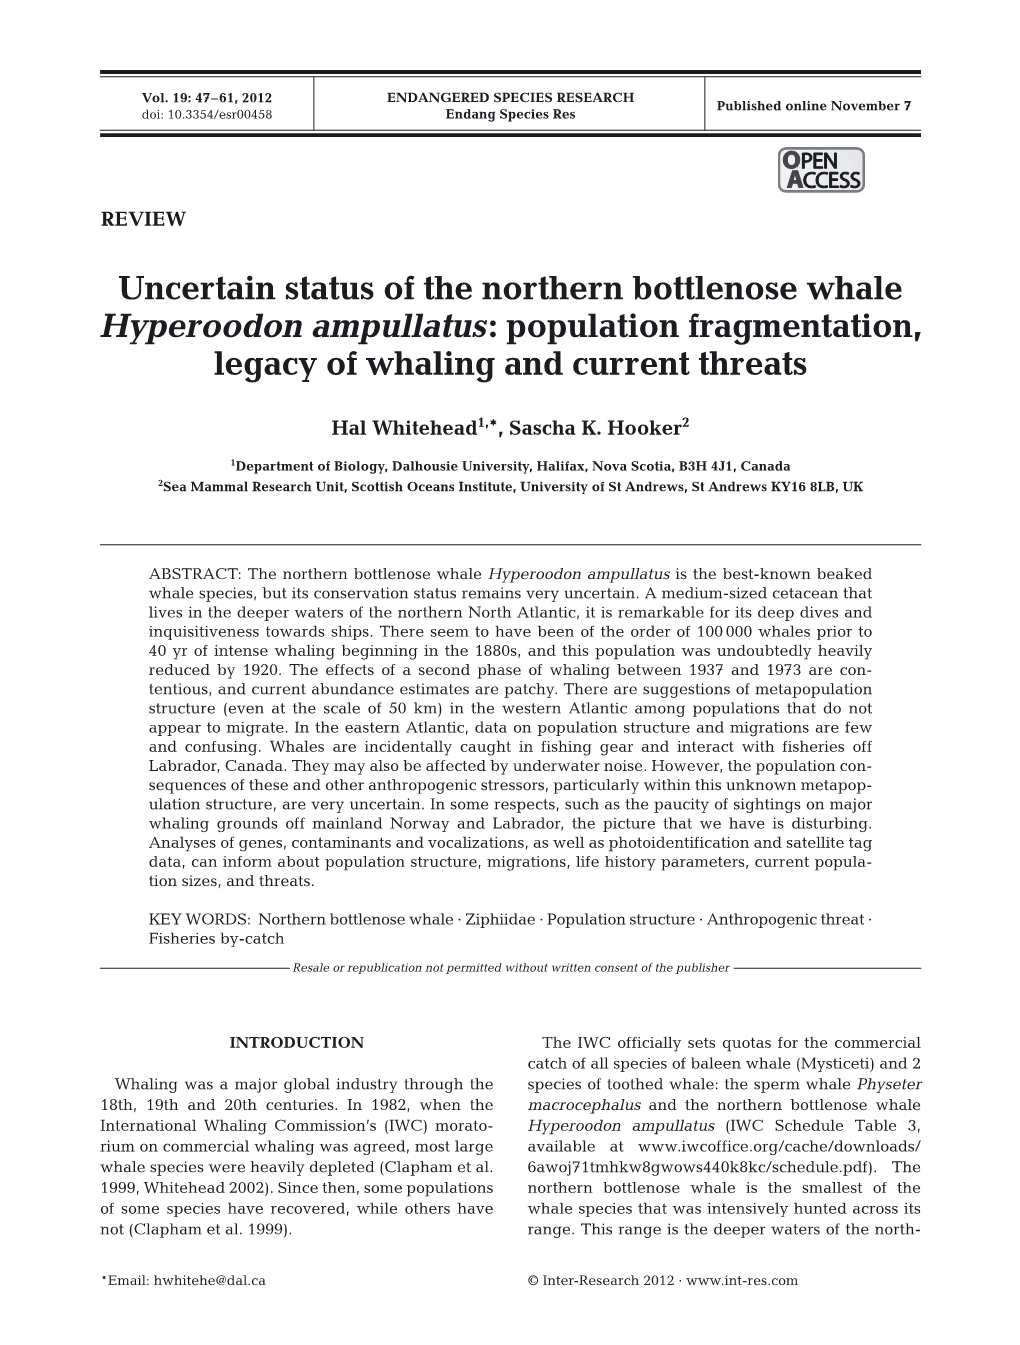 Uncertain Status of the Northern Bottlenose Whale Hyperoodon Ampullatus: Population Fragmentation, Legacy of Whaling and Current Threats